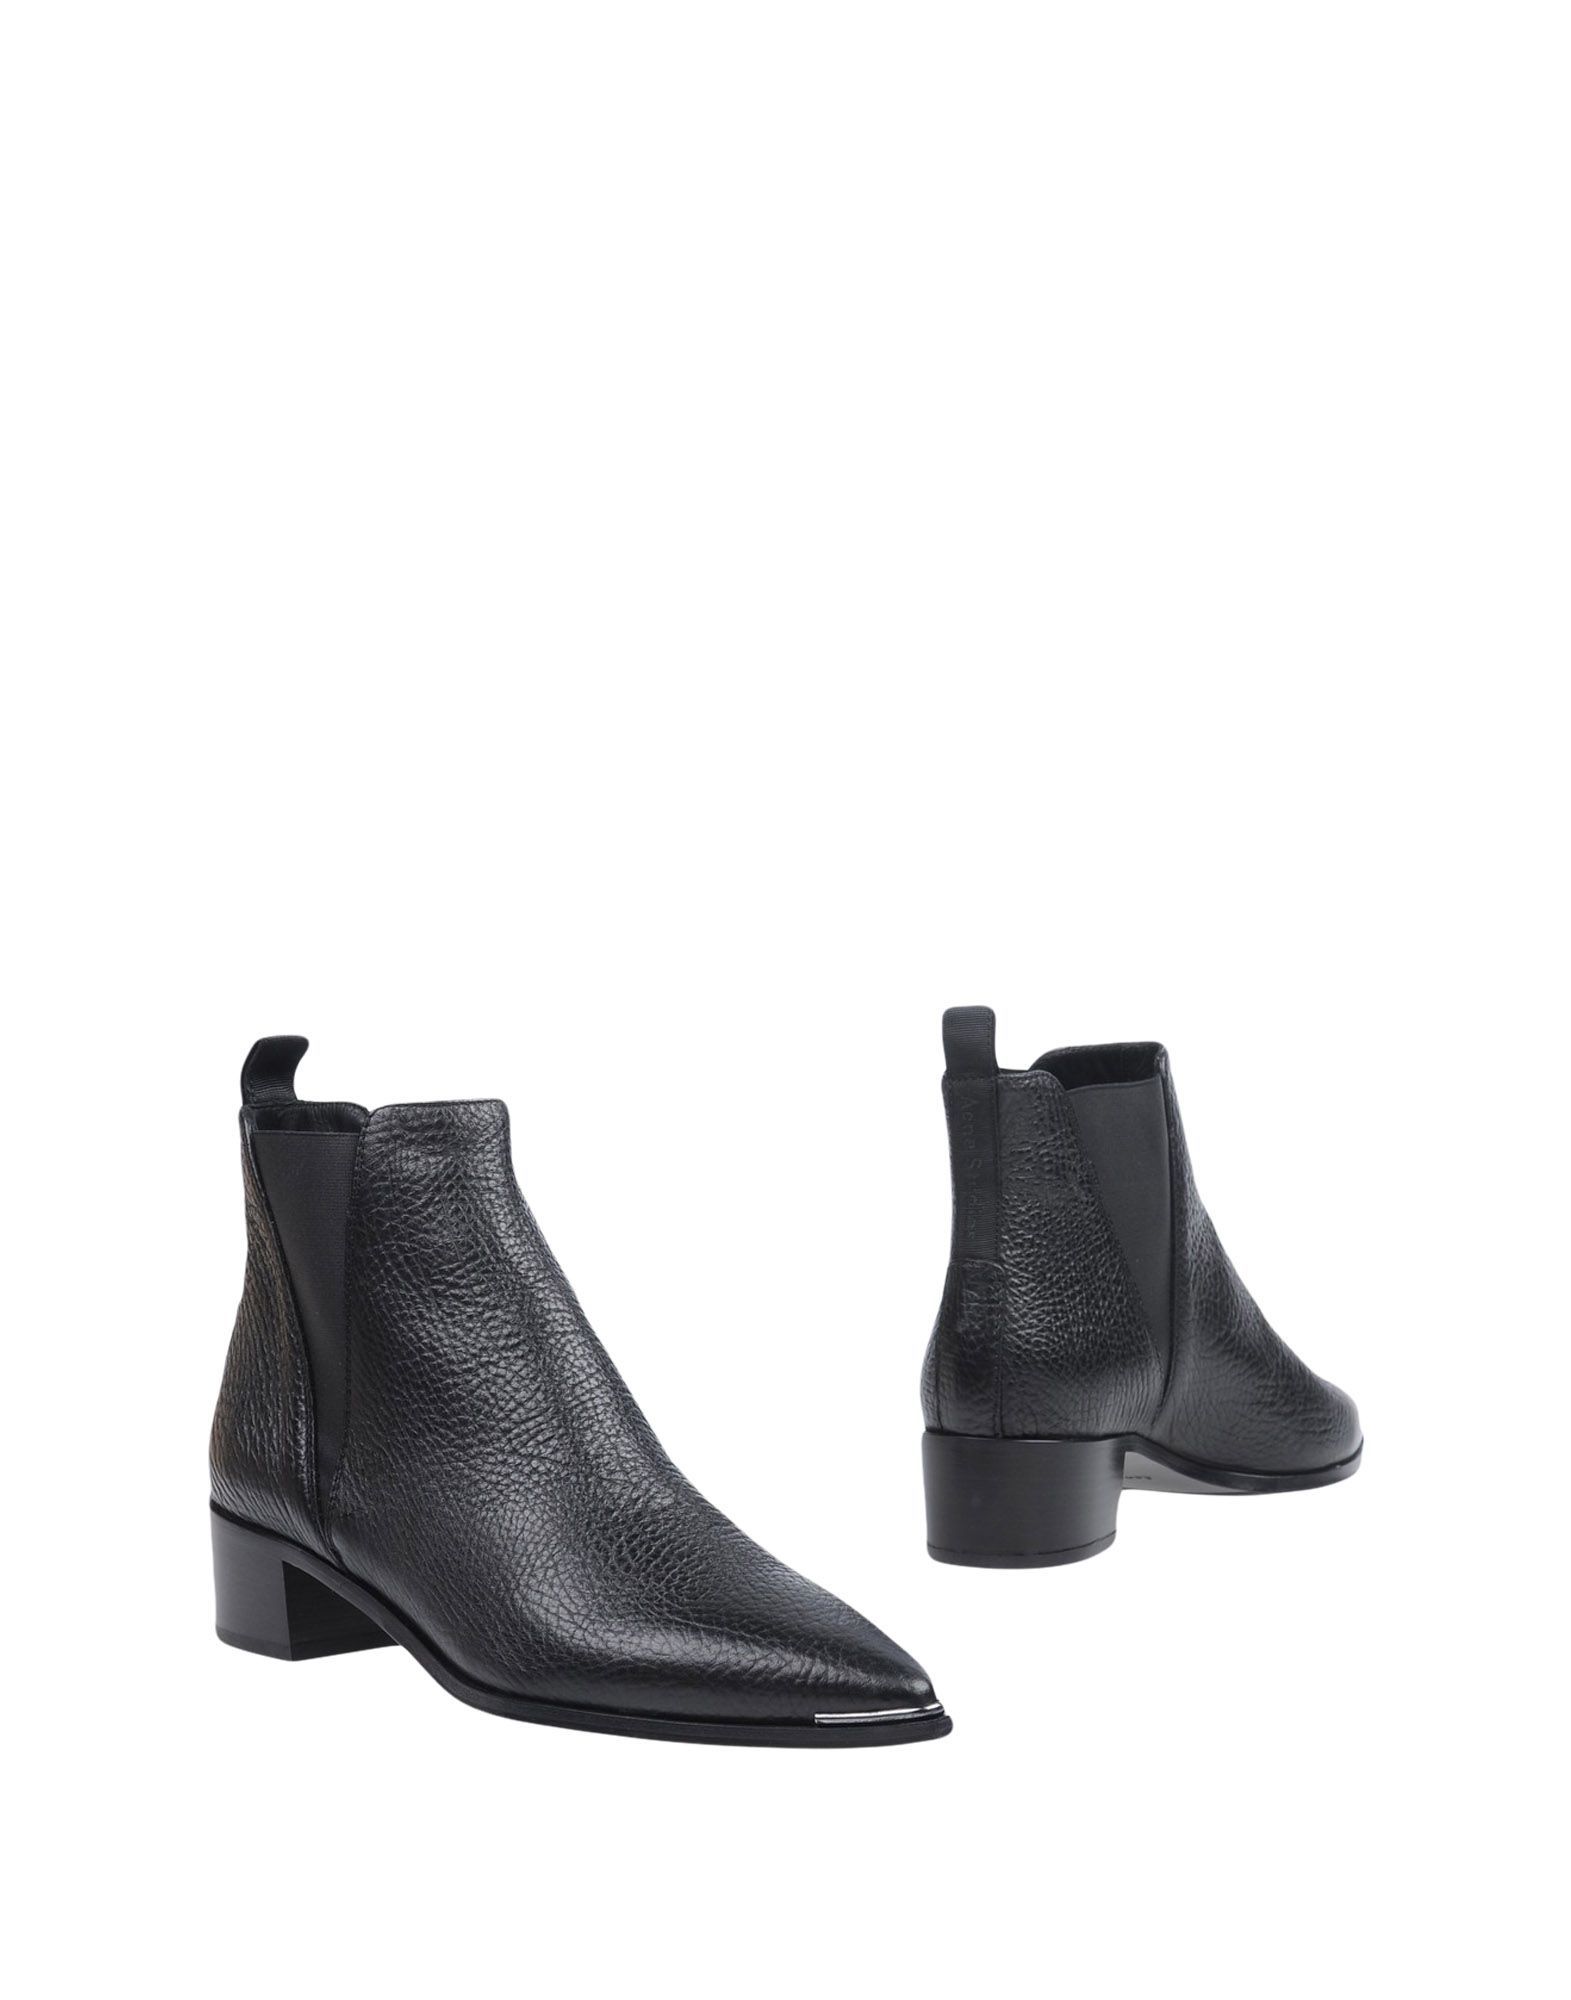 ACNE STUDIOS Ankle boots | YOOX (US)